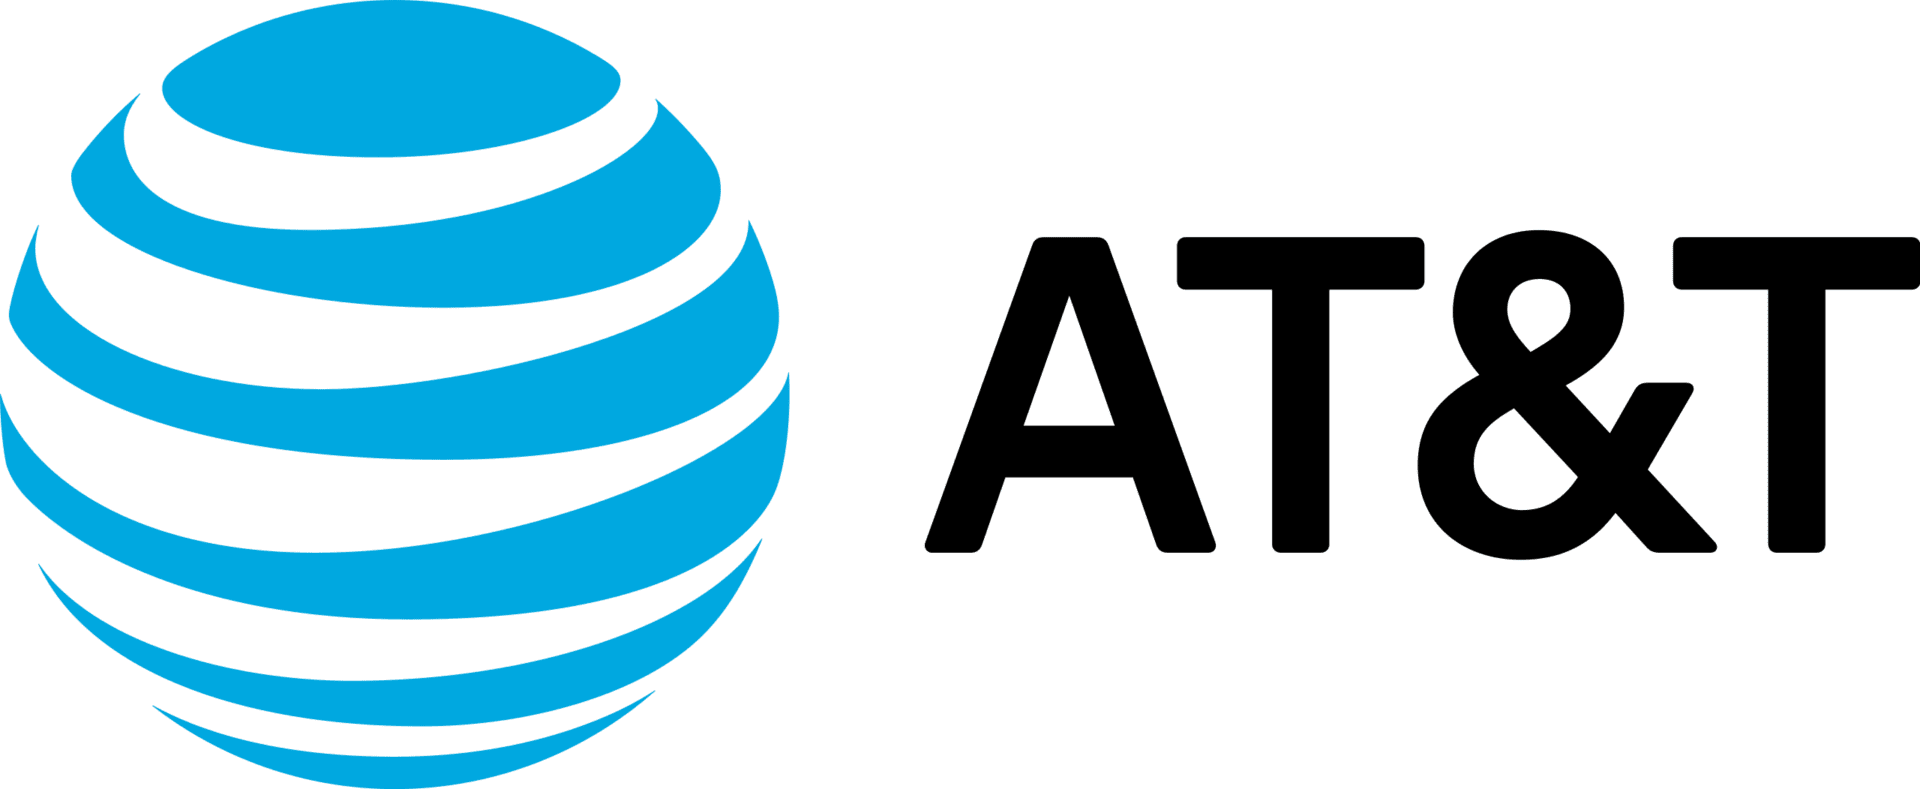 A green background with an at & t logo.